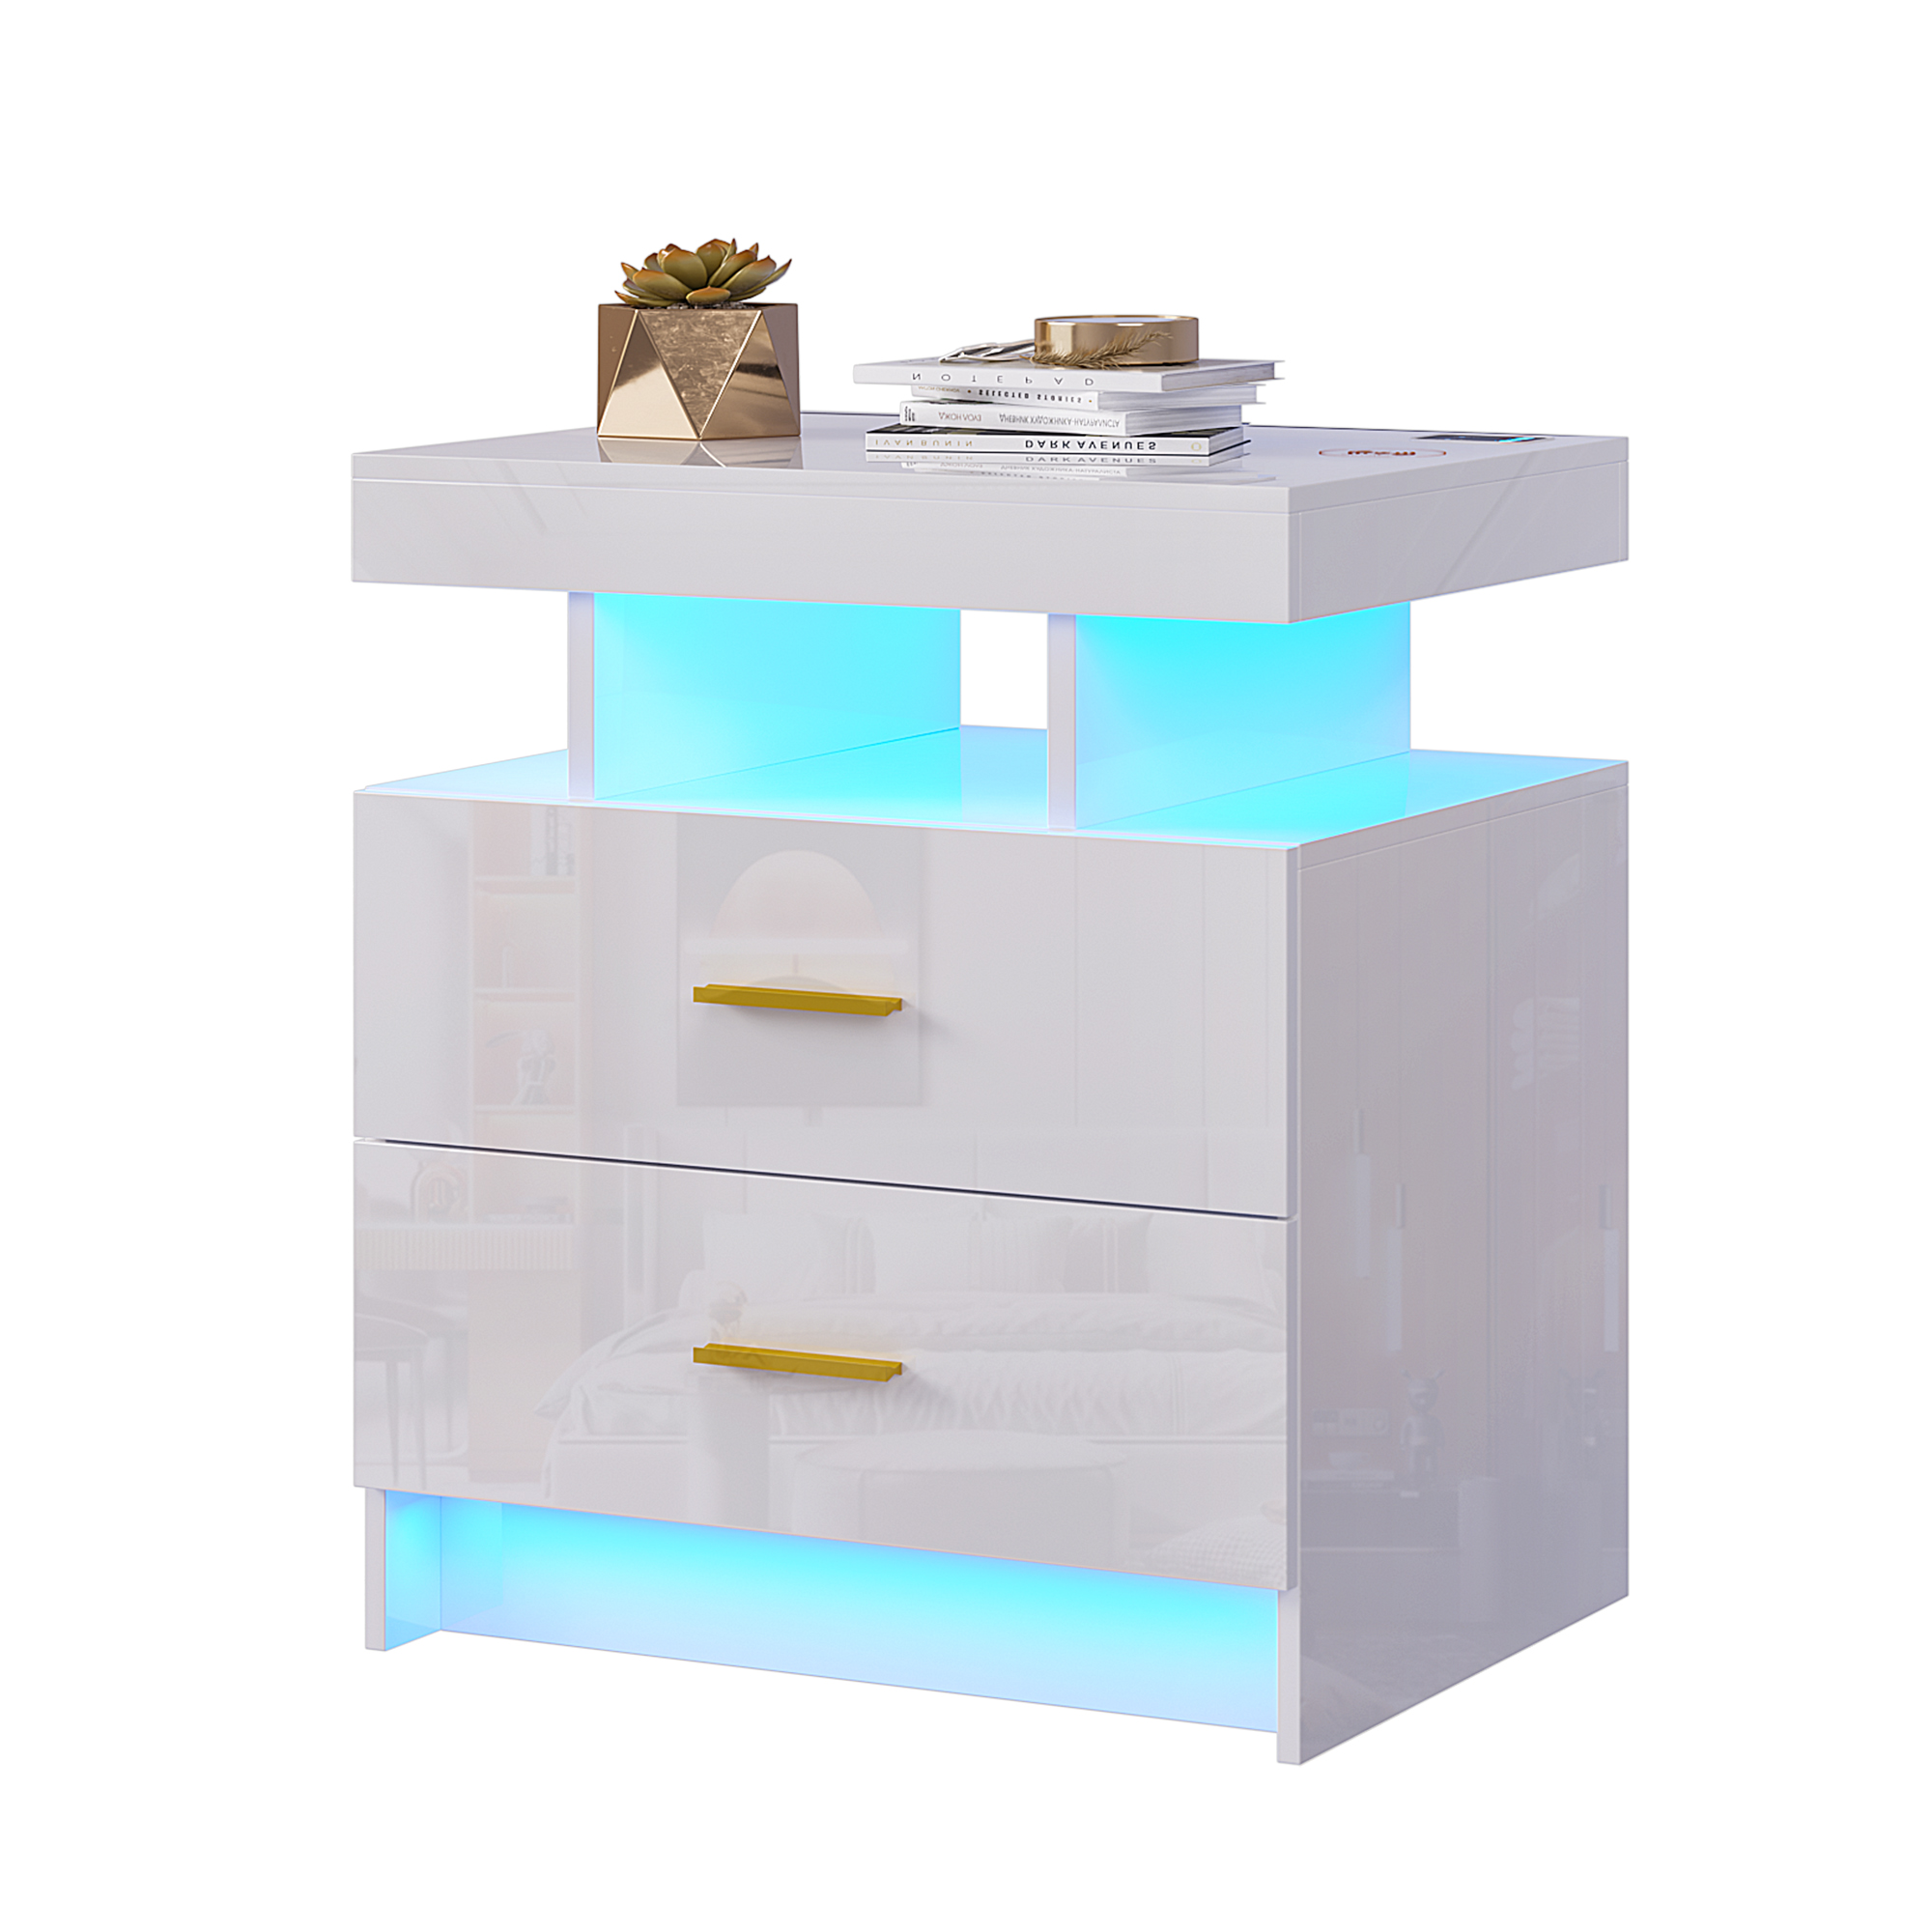 LVSOMT Led Light Nightstands With Usb Ports And Wireless Charging Station